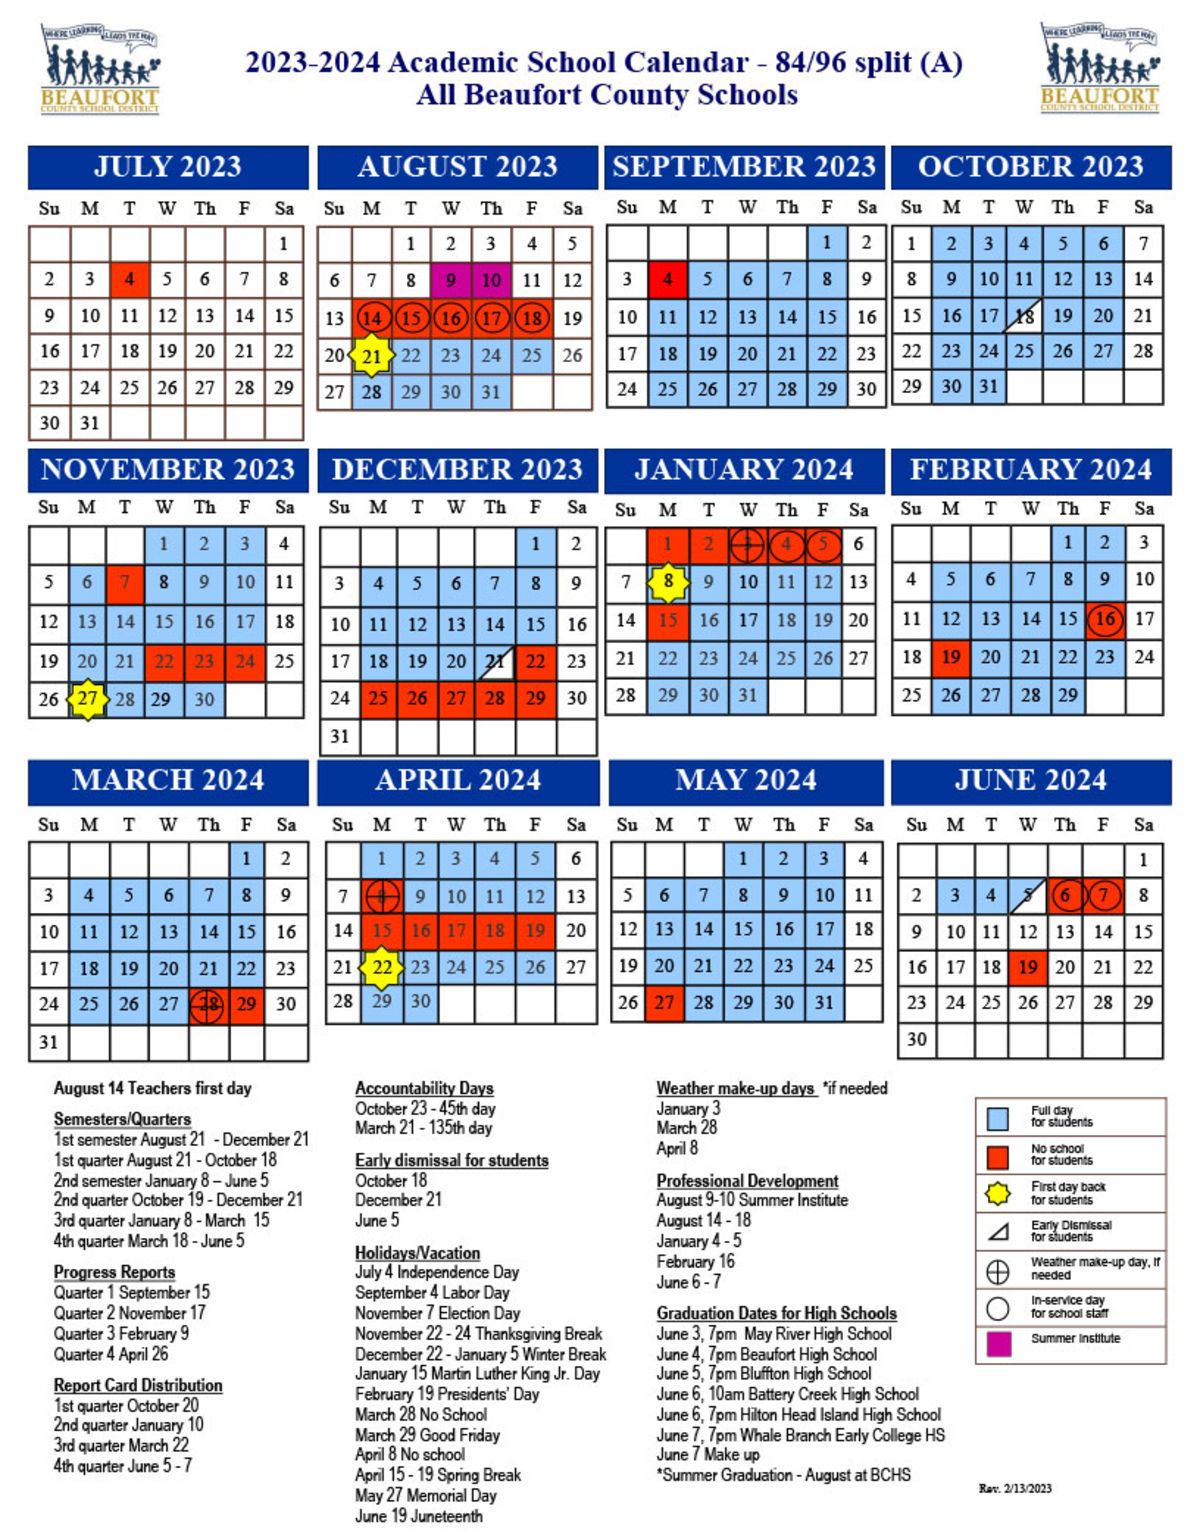 Board of Education approves school calendar for 2023 24 academic year